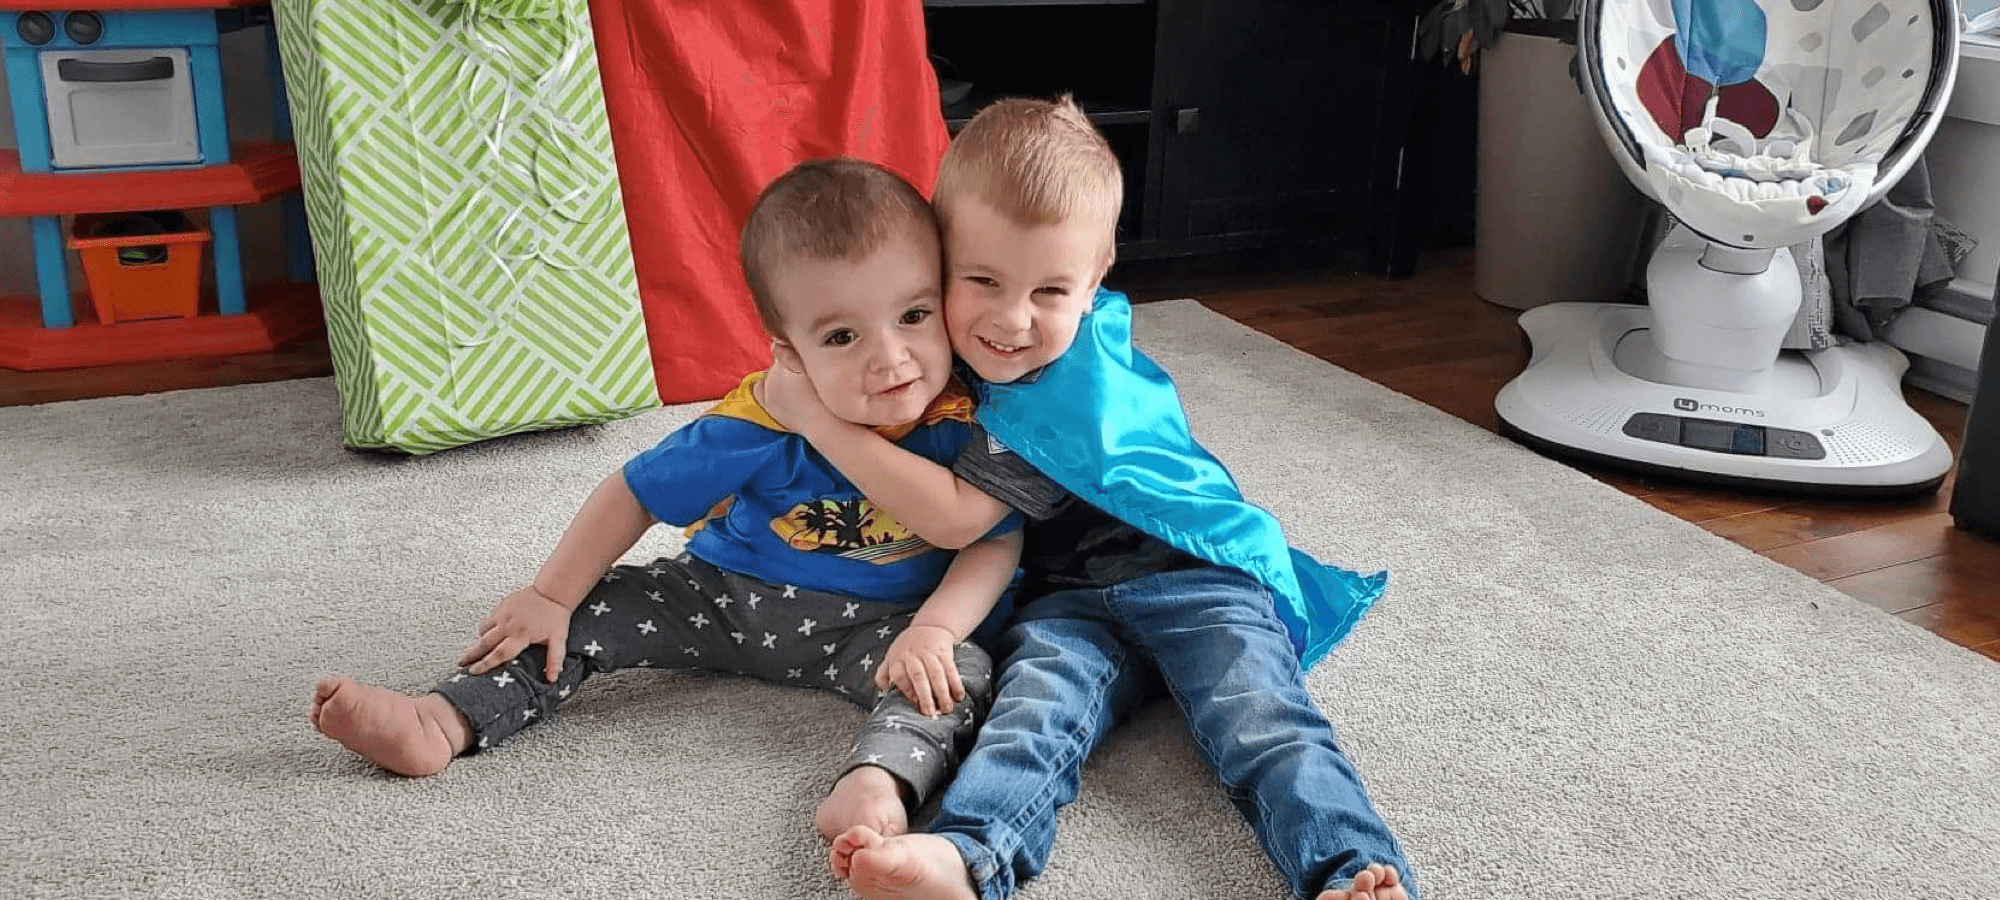 two young boys sitting side-by-side, hugging while wearing superhero capes.